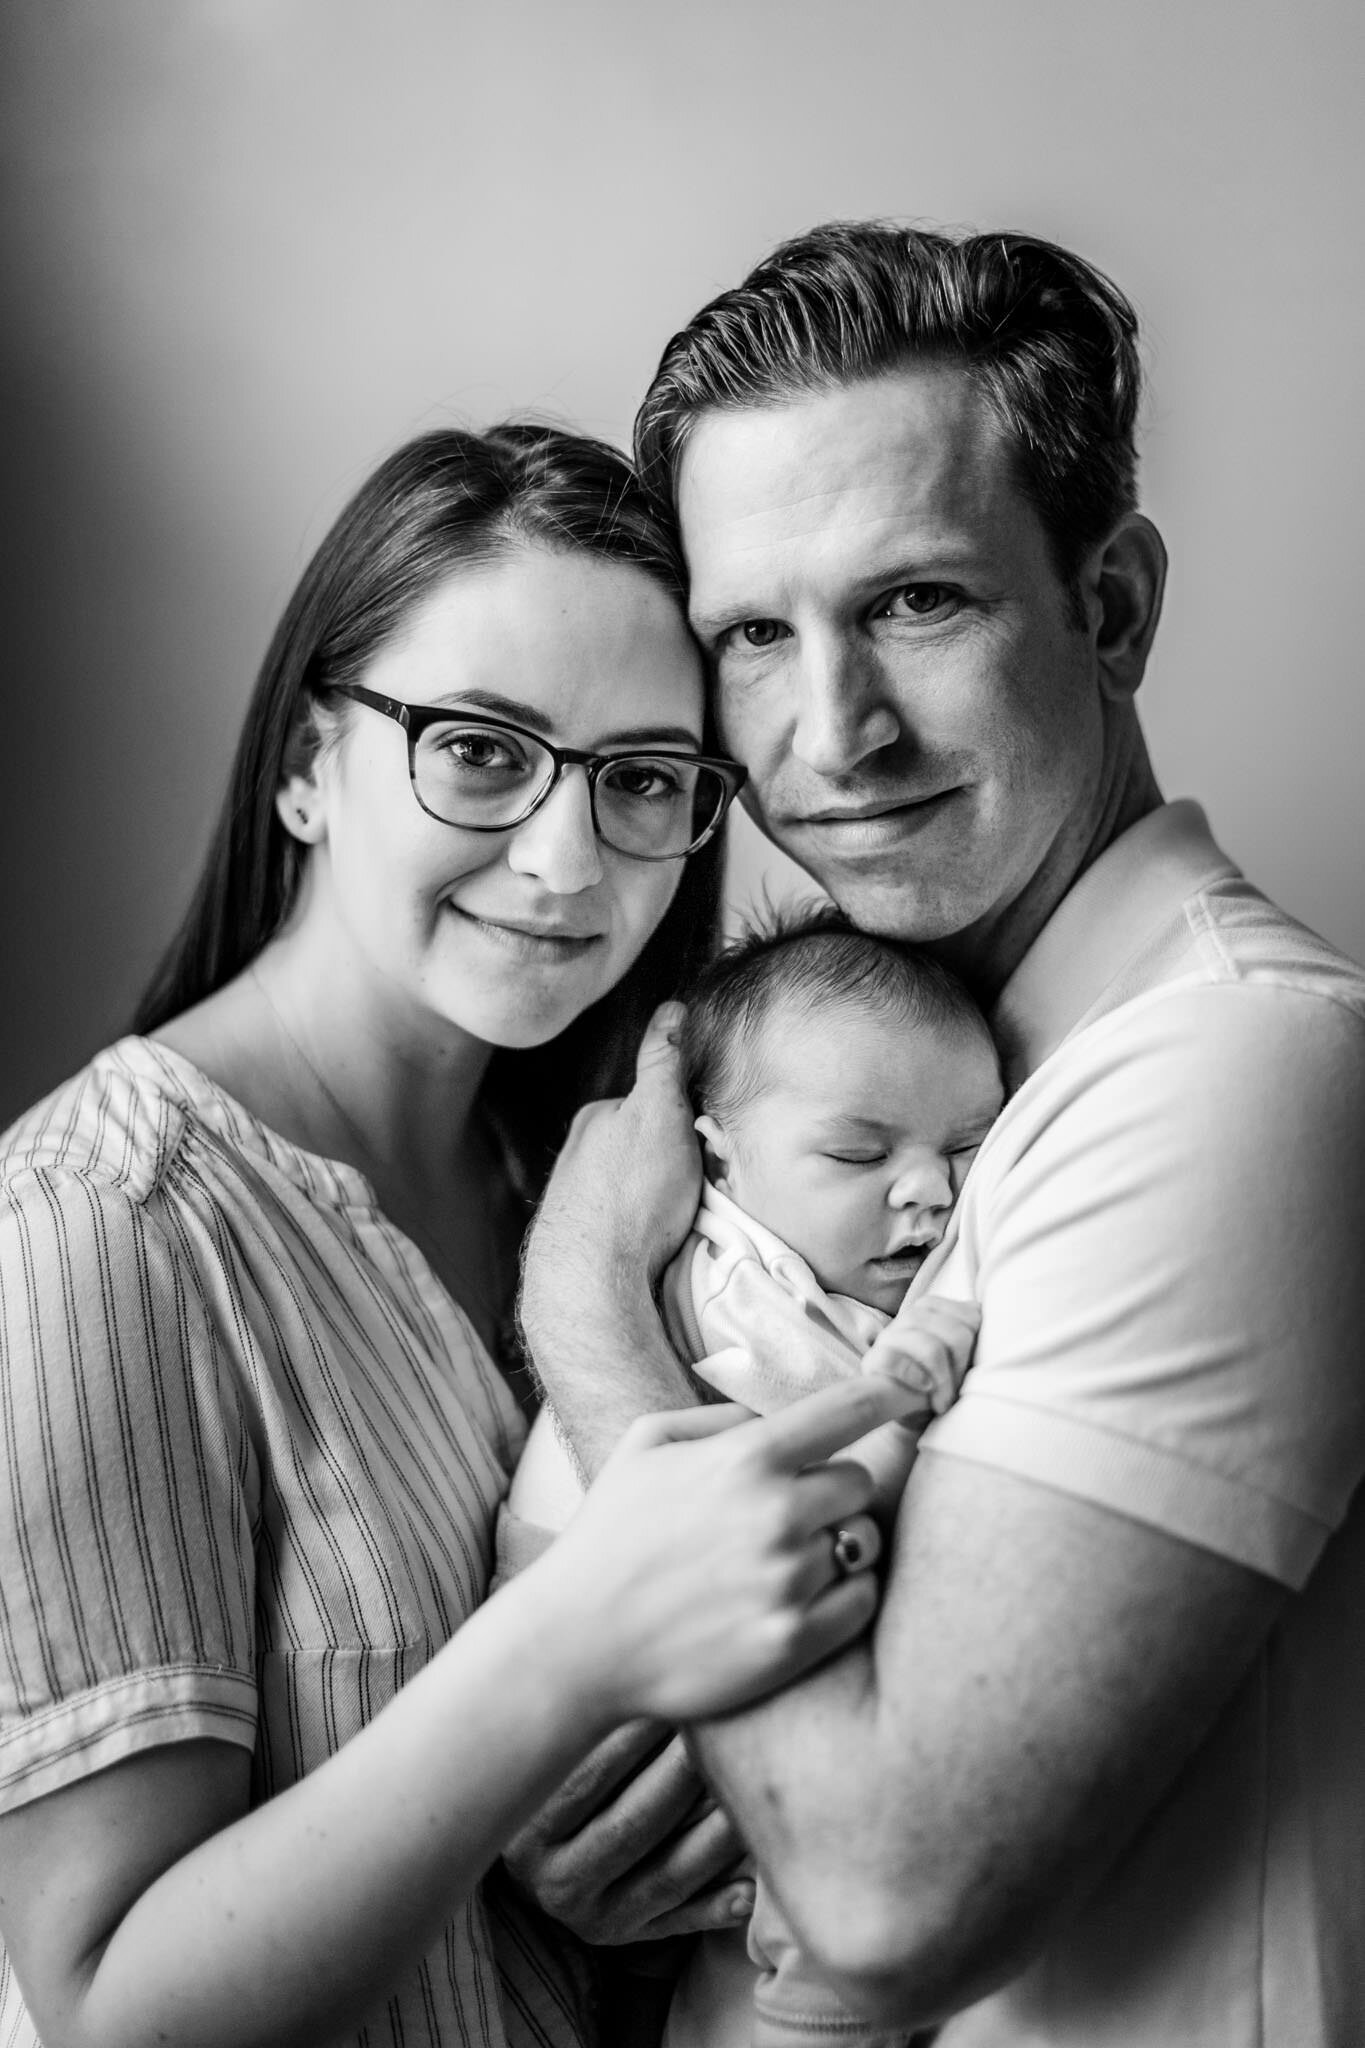 Raleigh Newborn Photographer | By G. Lin Photography | Black and white lifestyle family photo